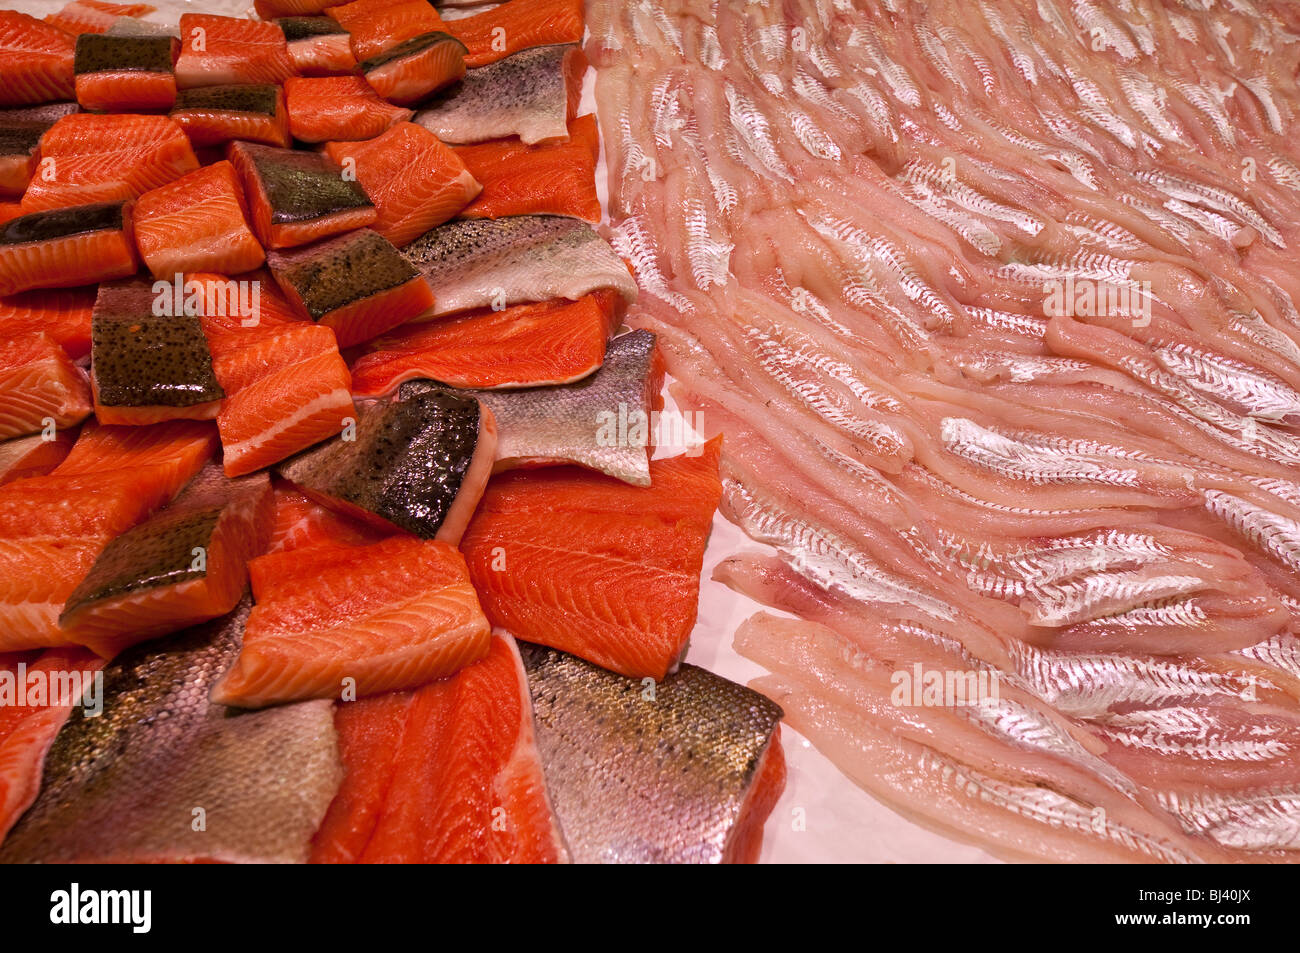 Salmon fillets and Cabillaud on fishmonger's slab - France. Stock Photo